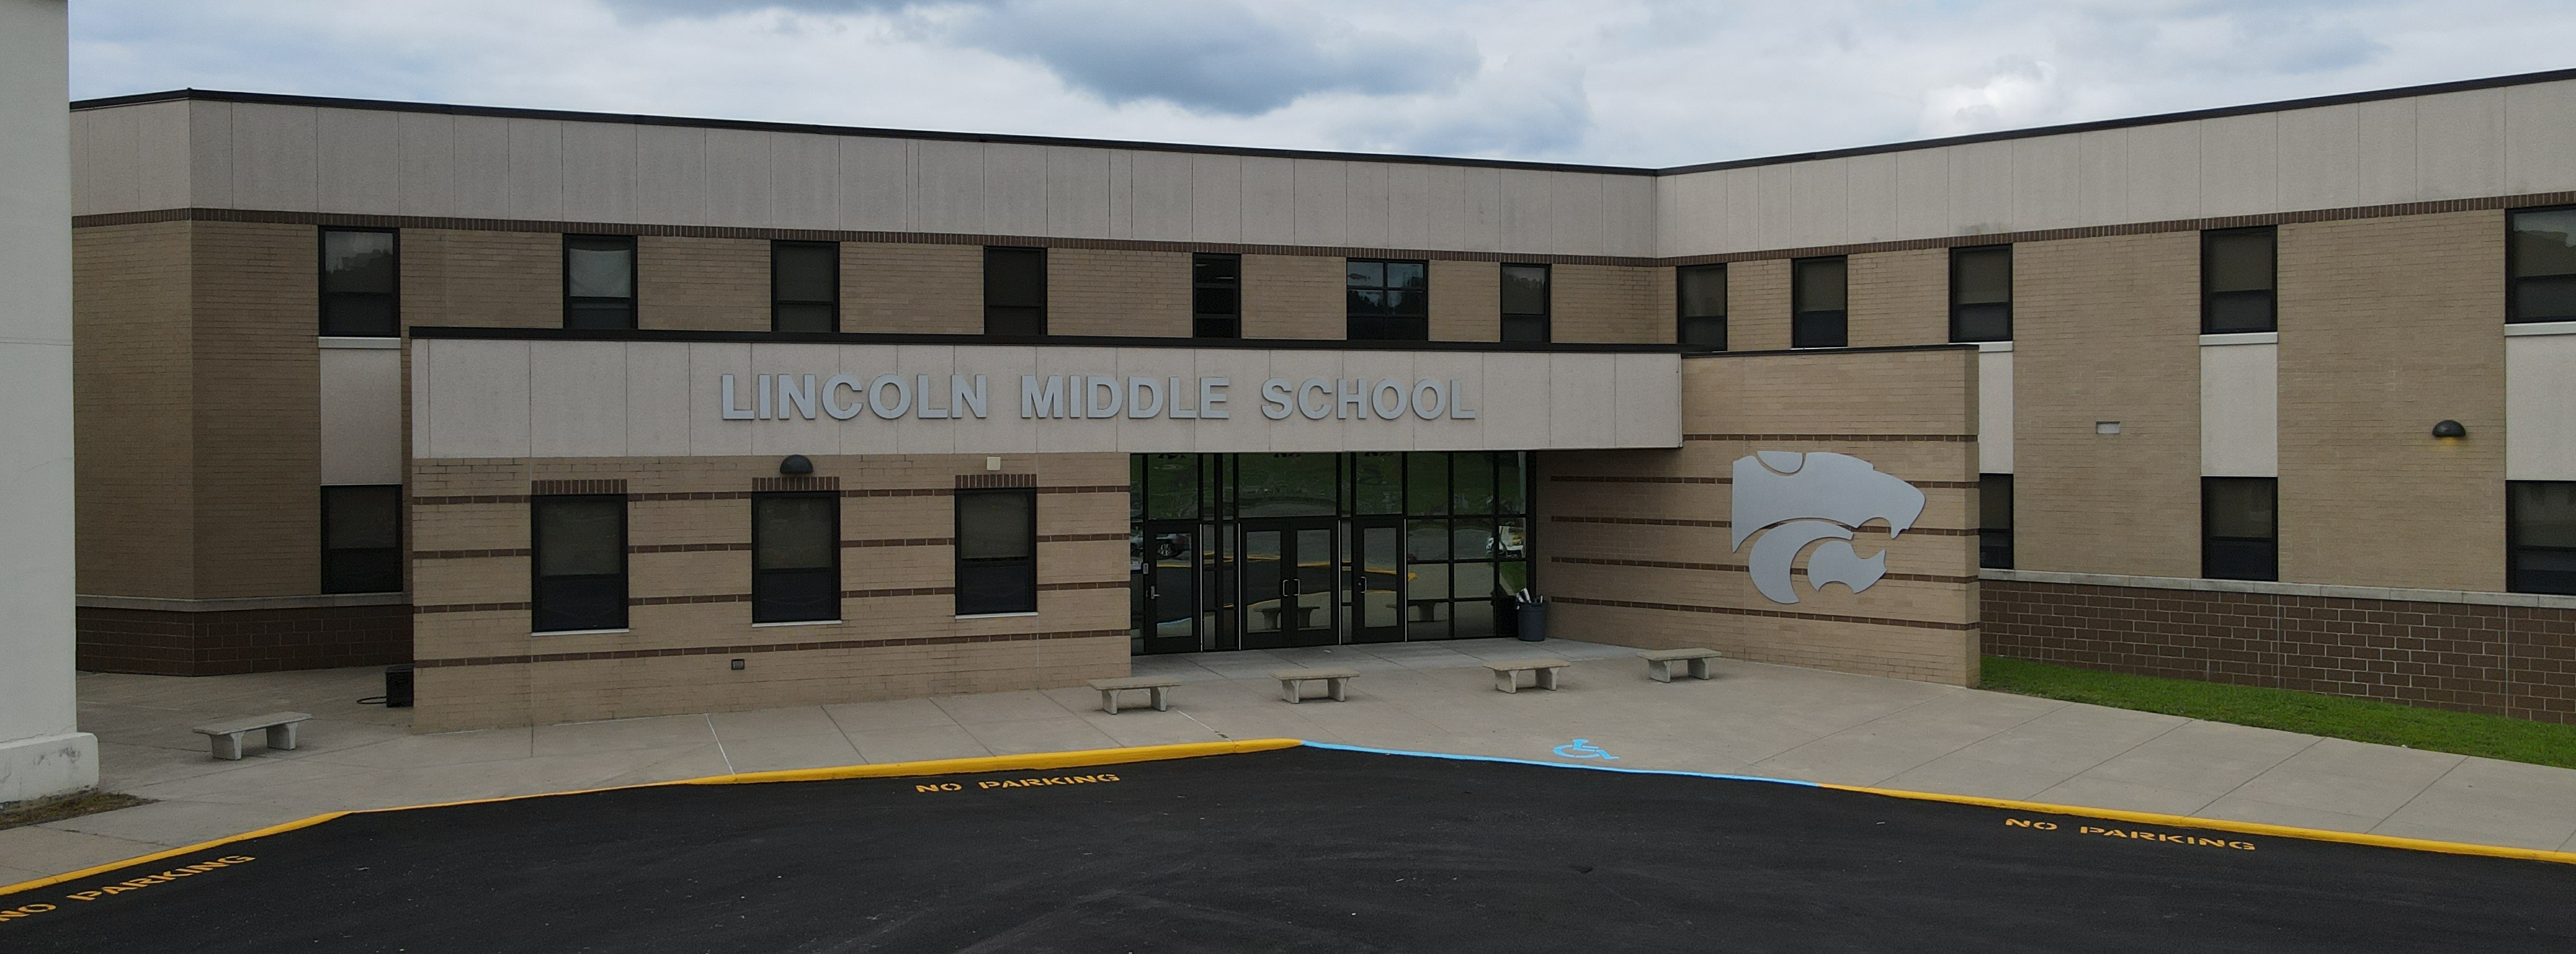 Lincoln Middle School Front